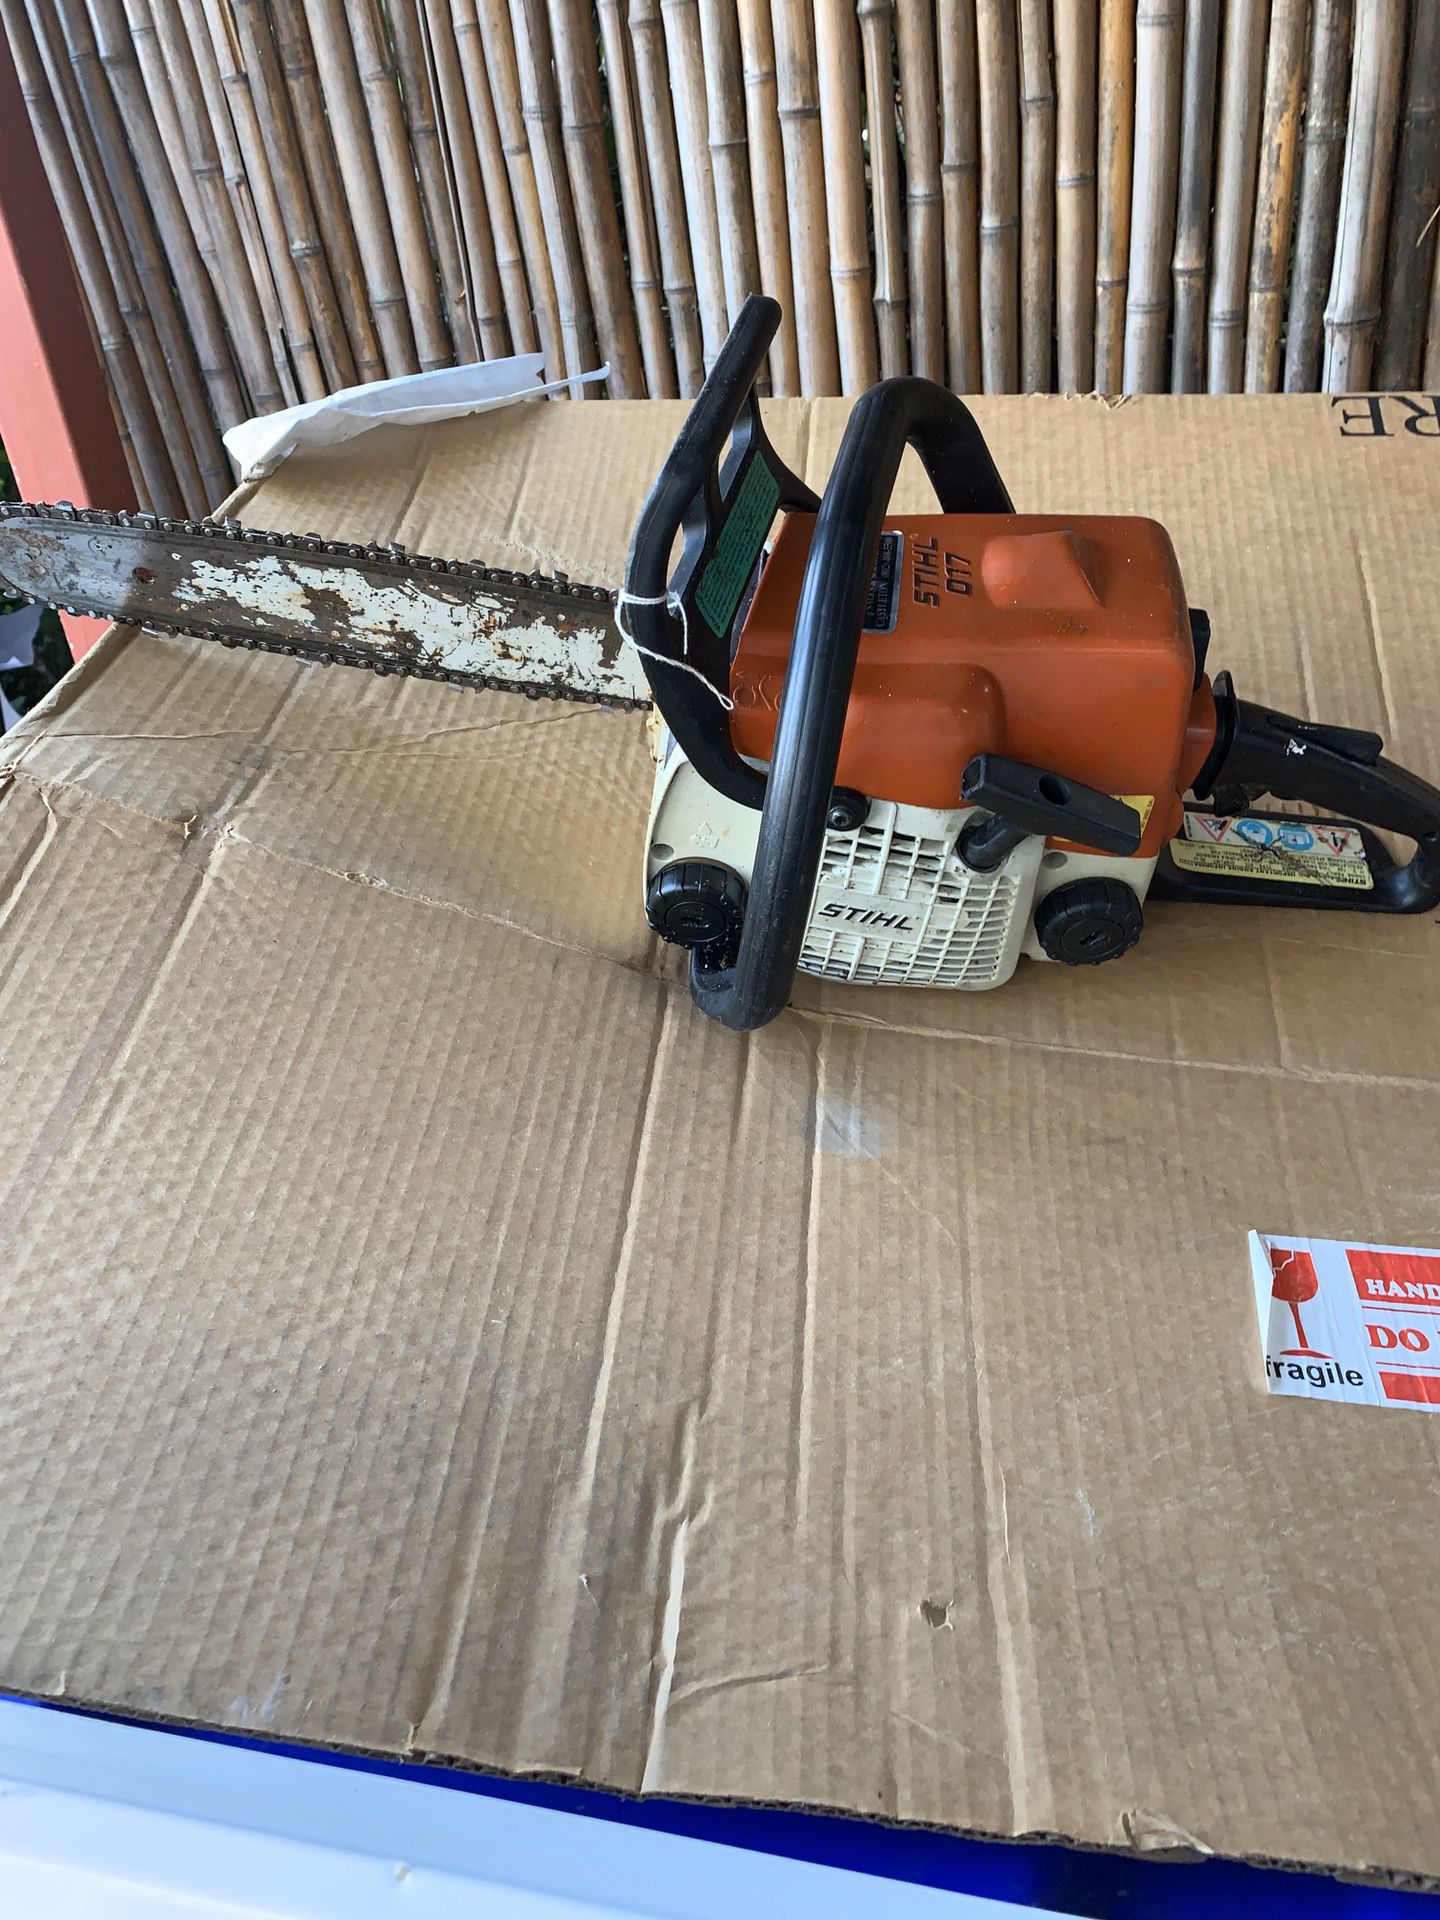 Super nice small steel chainsaw works excellent